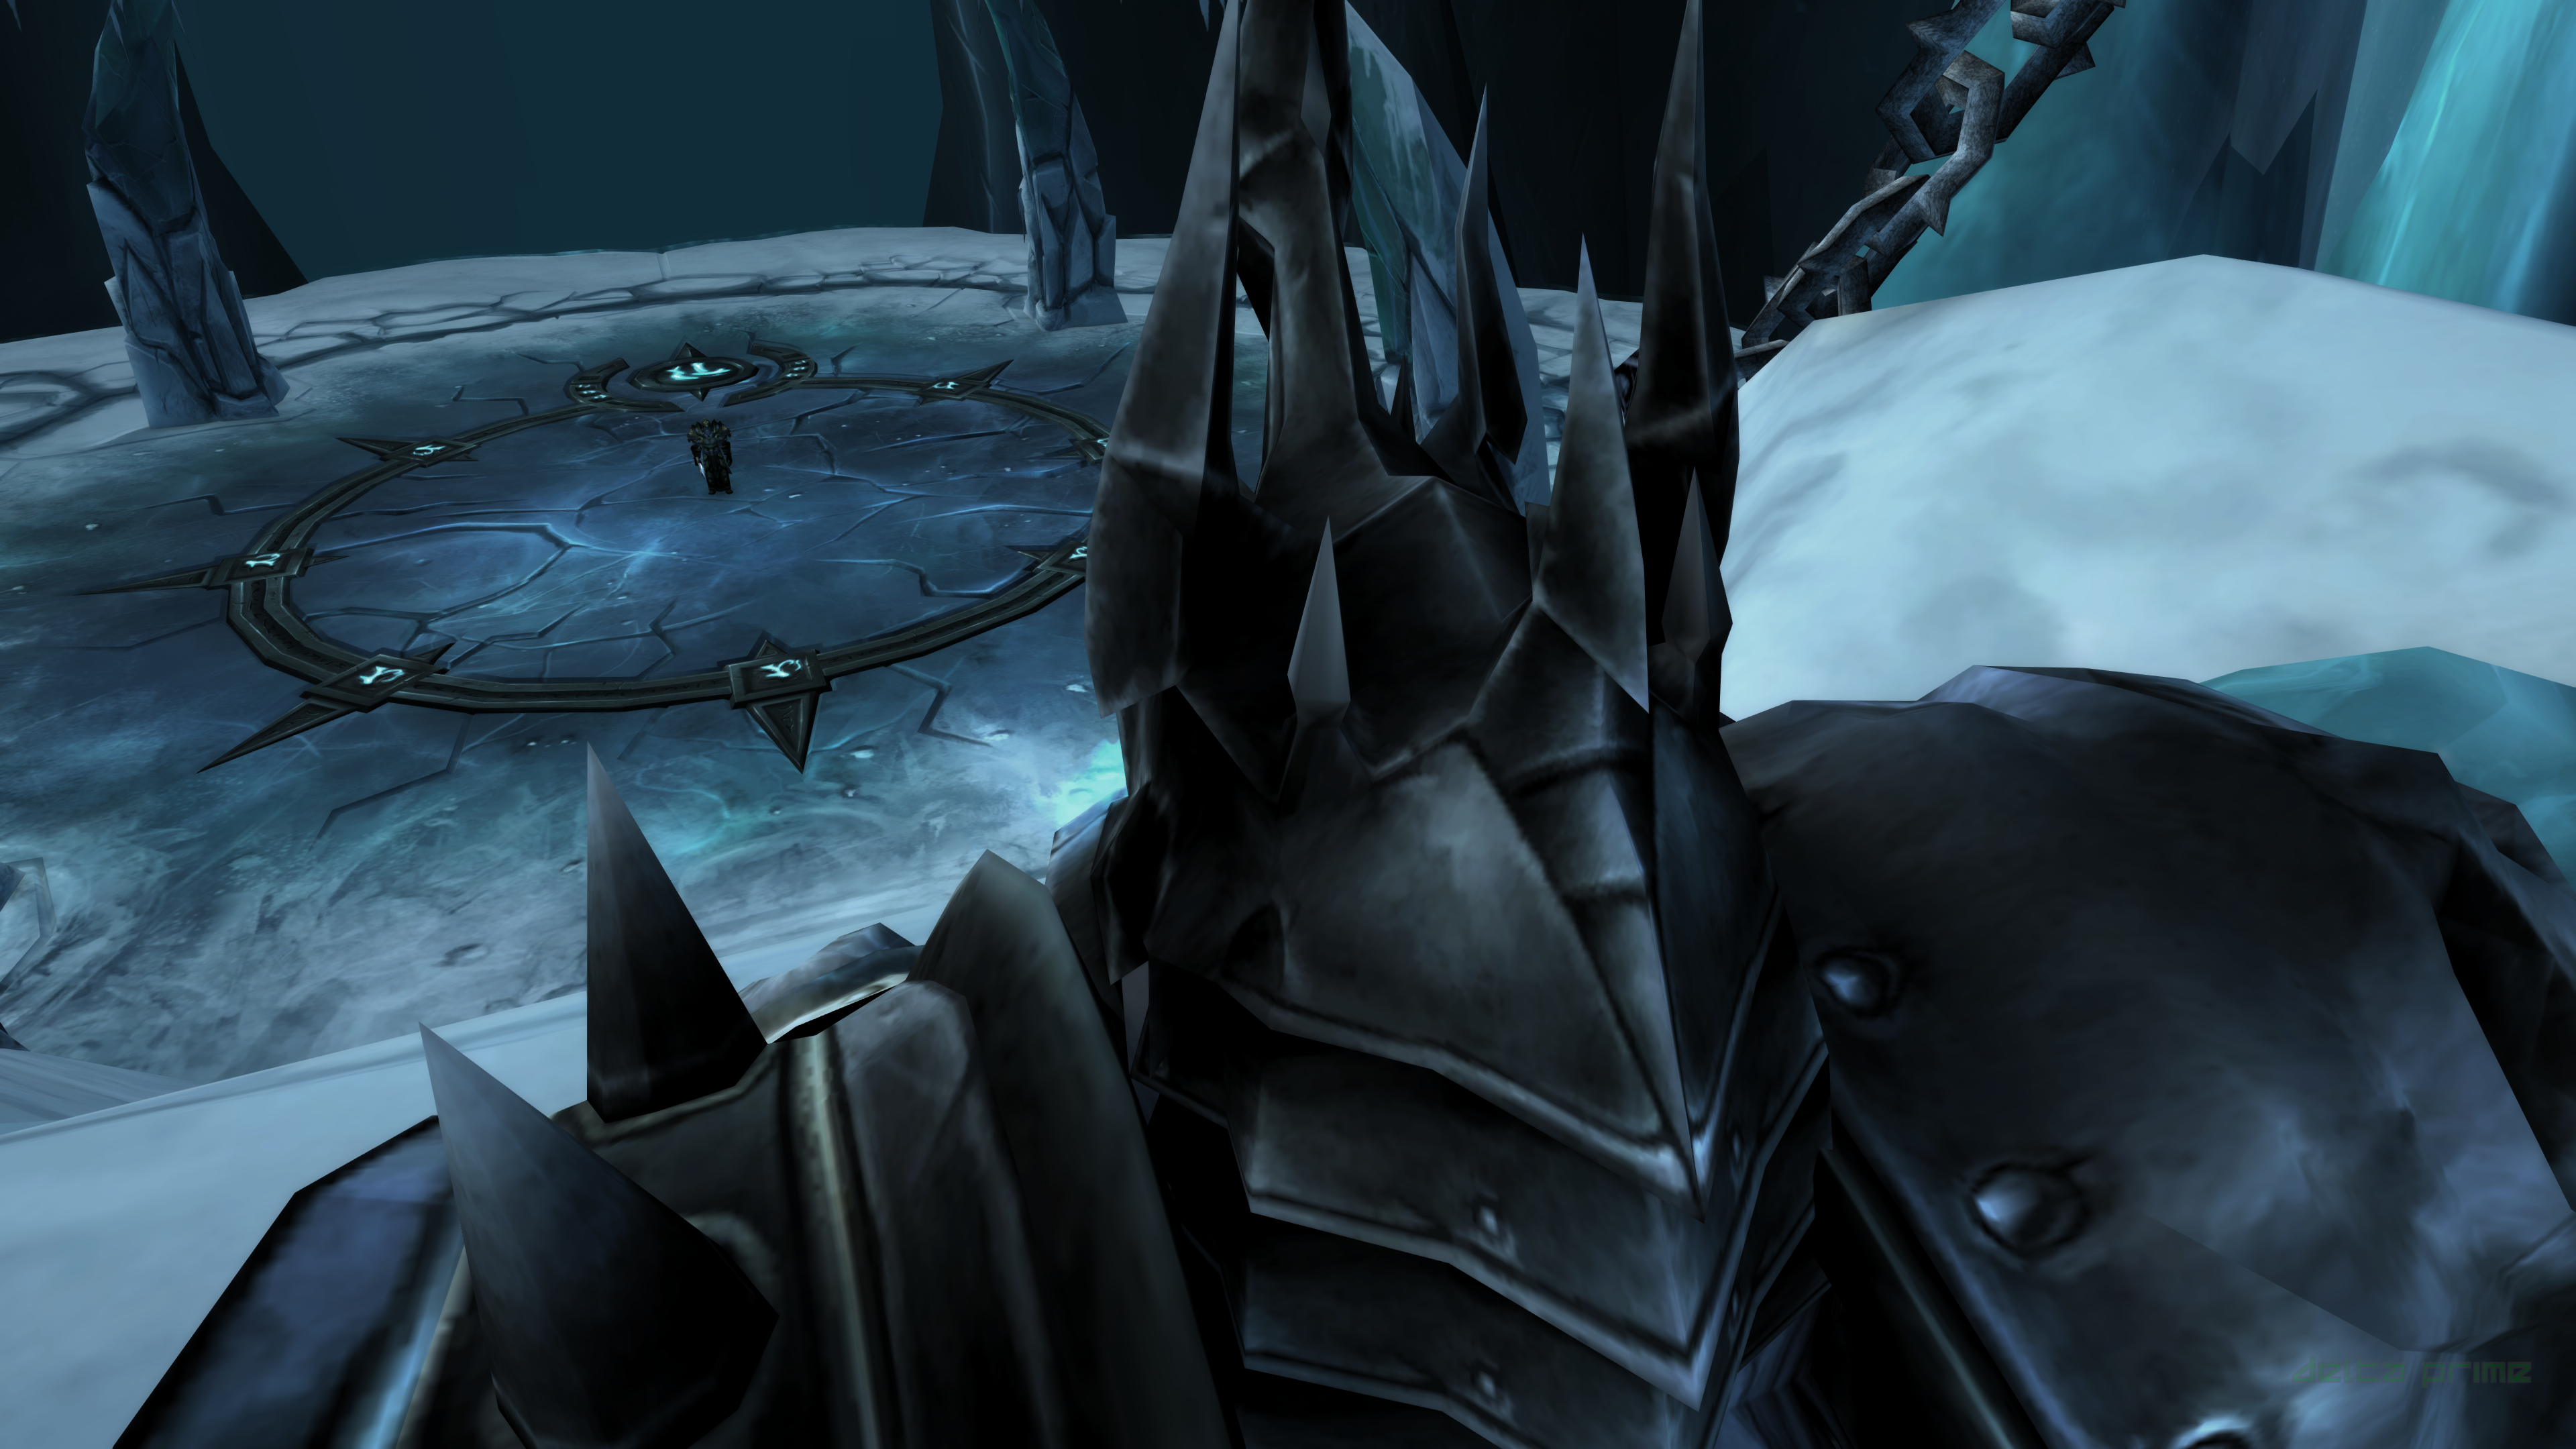 World Of Warcraft Wrath Of The Lich King The Lich King Arthas Menethil Tirion Fordring The Frozen Th 3840x2160